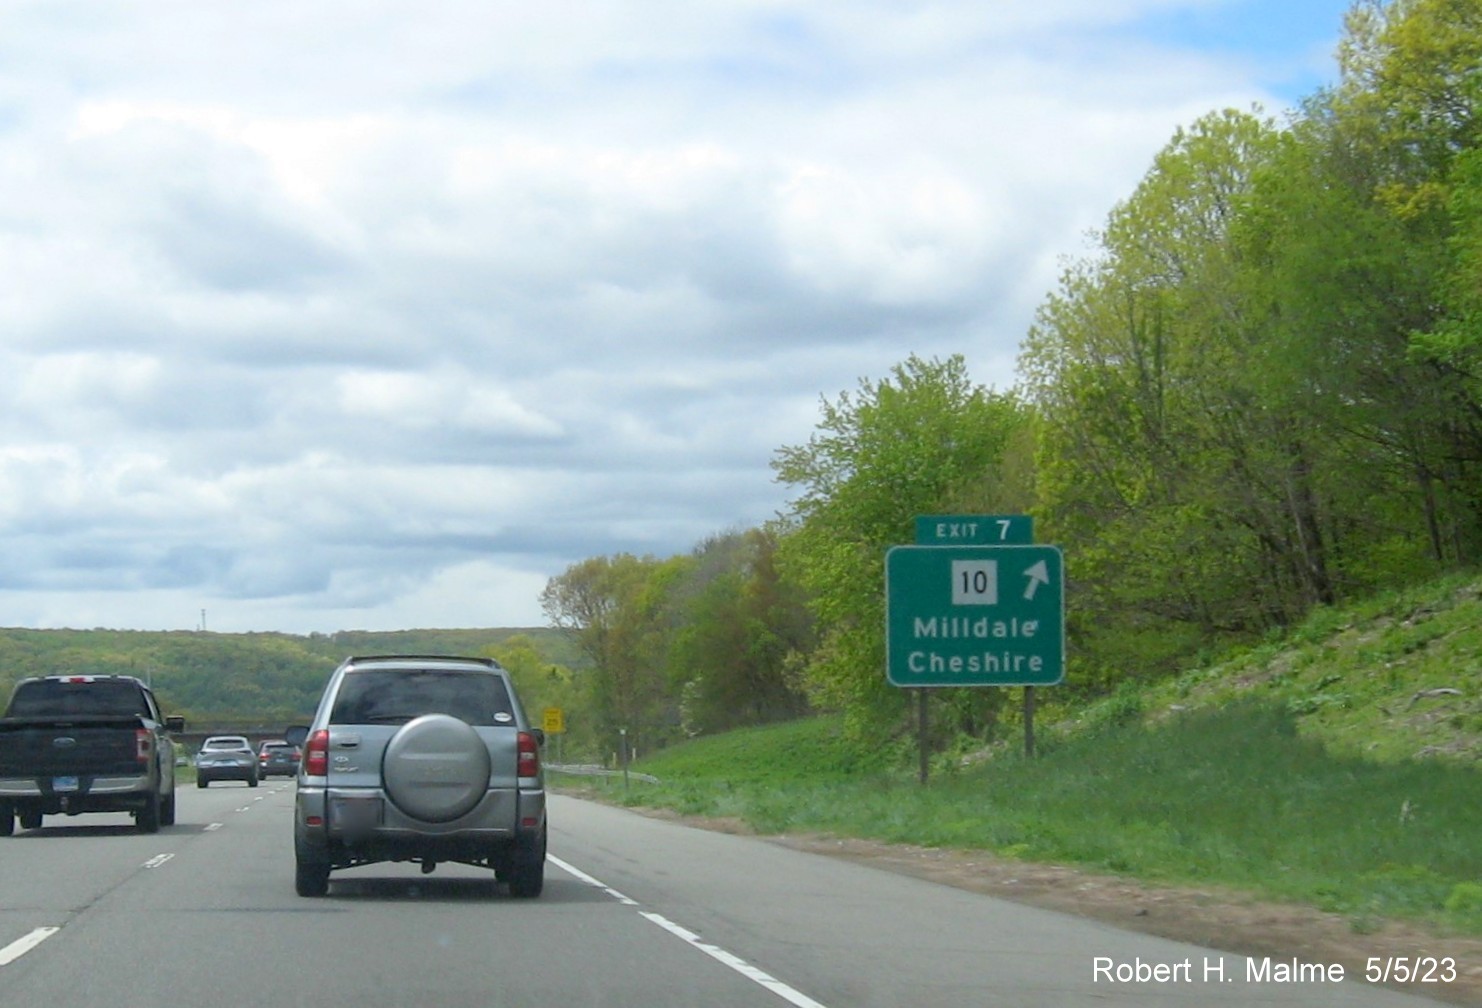 Image of gore sign for CT 10 exit with new milepost based exit number on I-691 West in Cheshire, May 2023